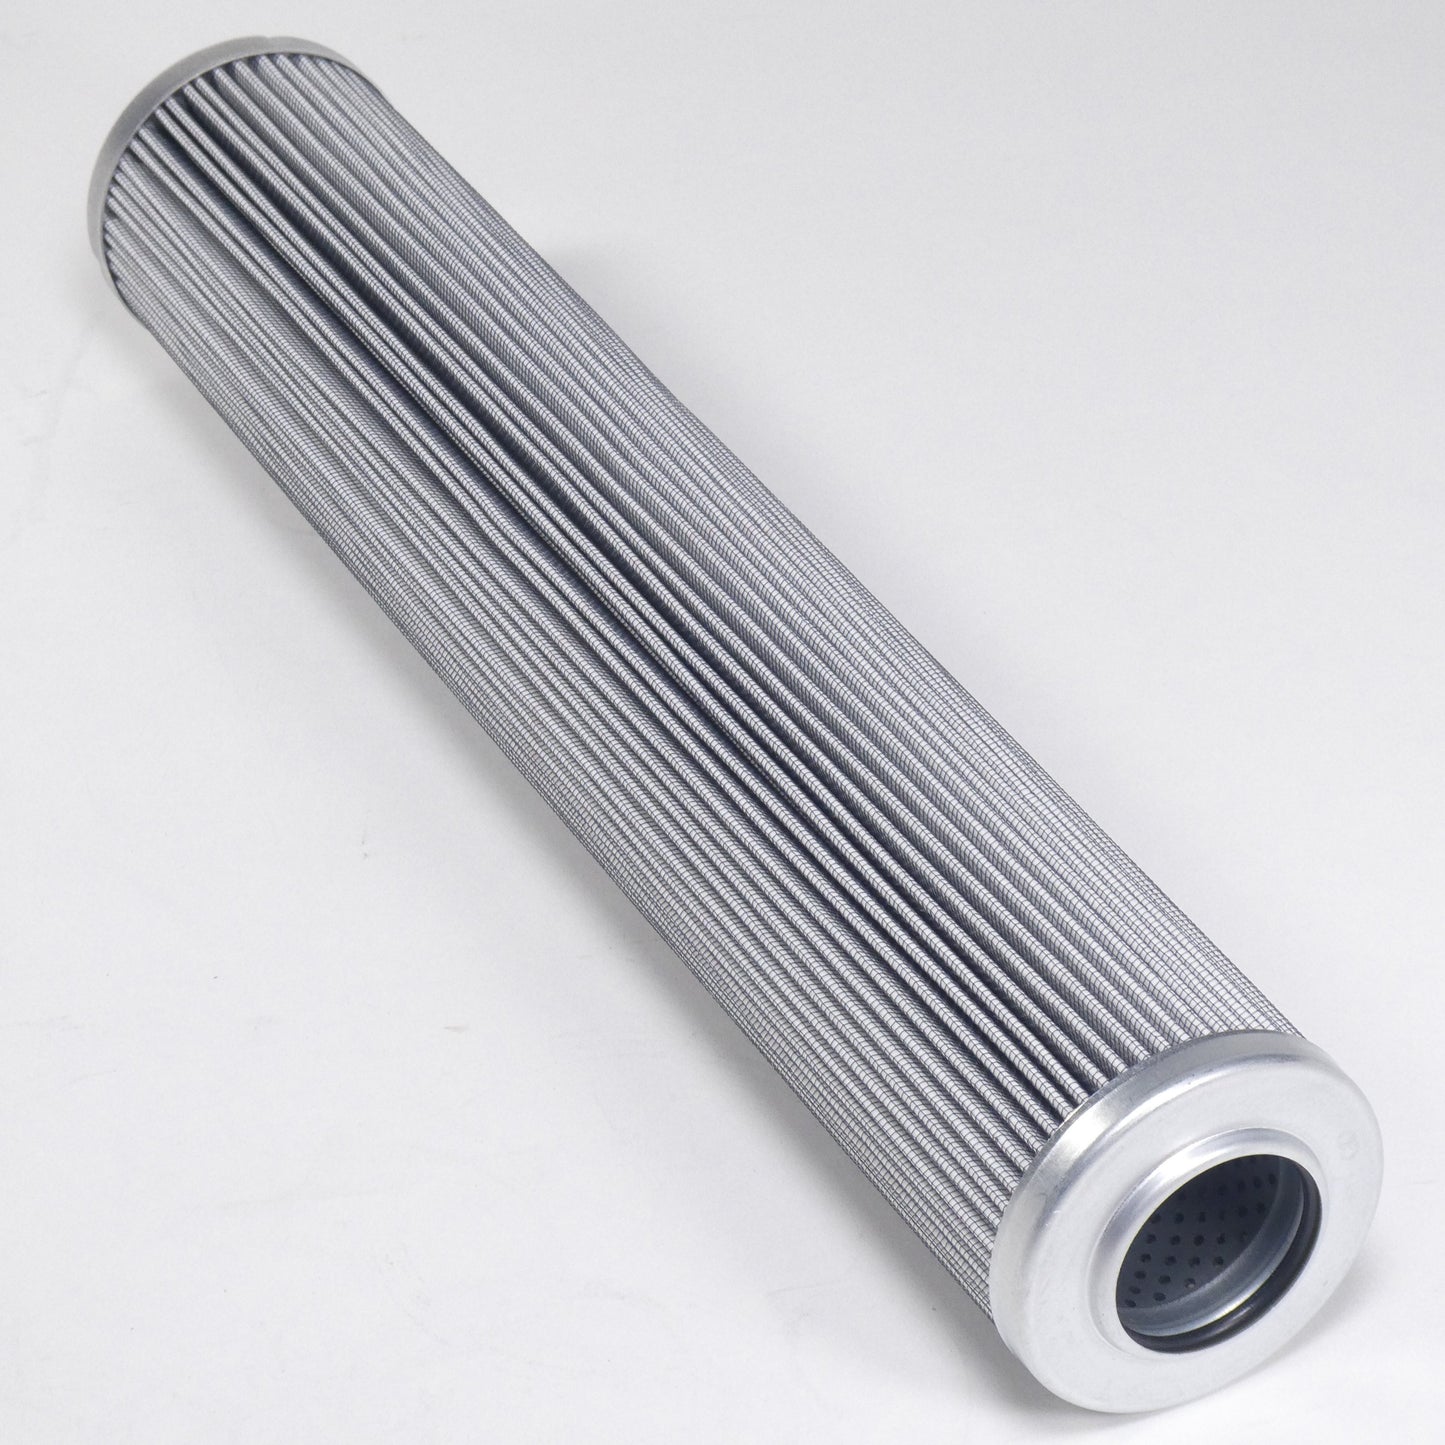 Hydrafil Replacement Filter Element for Kaydon KM9600-16-12-V